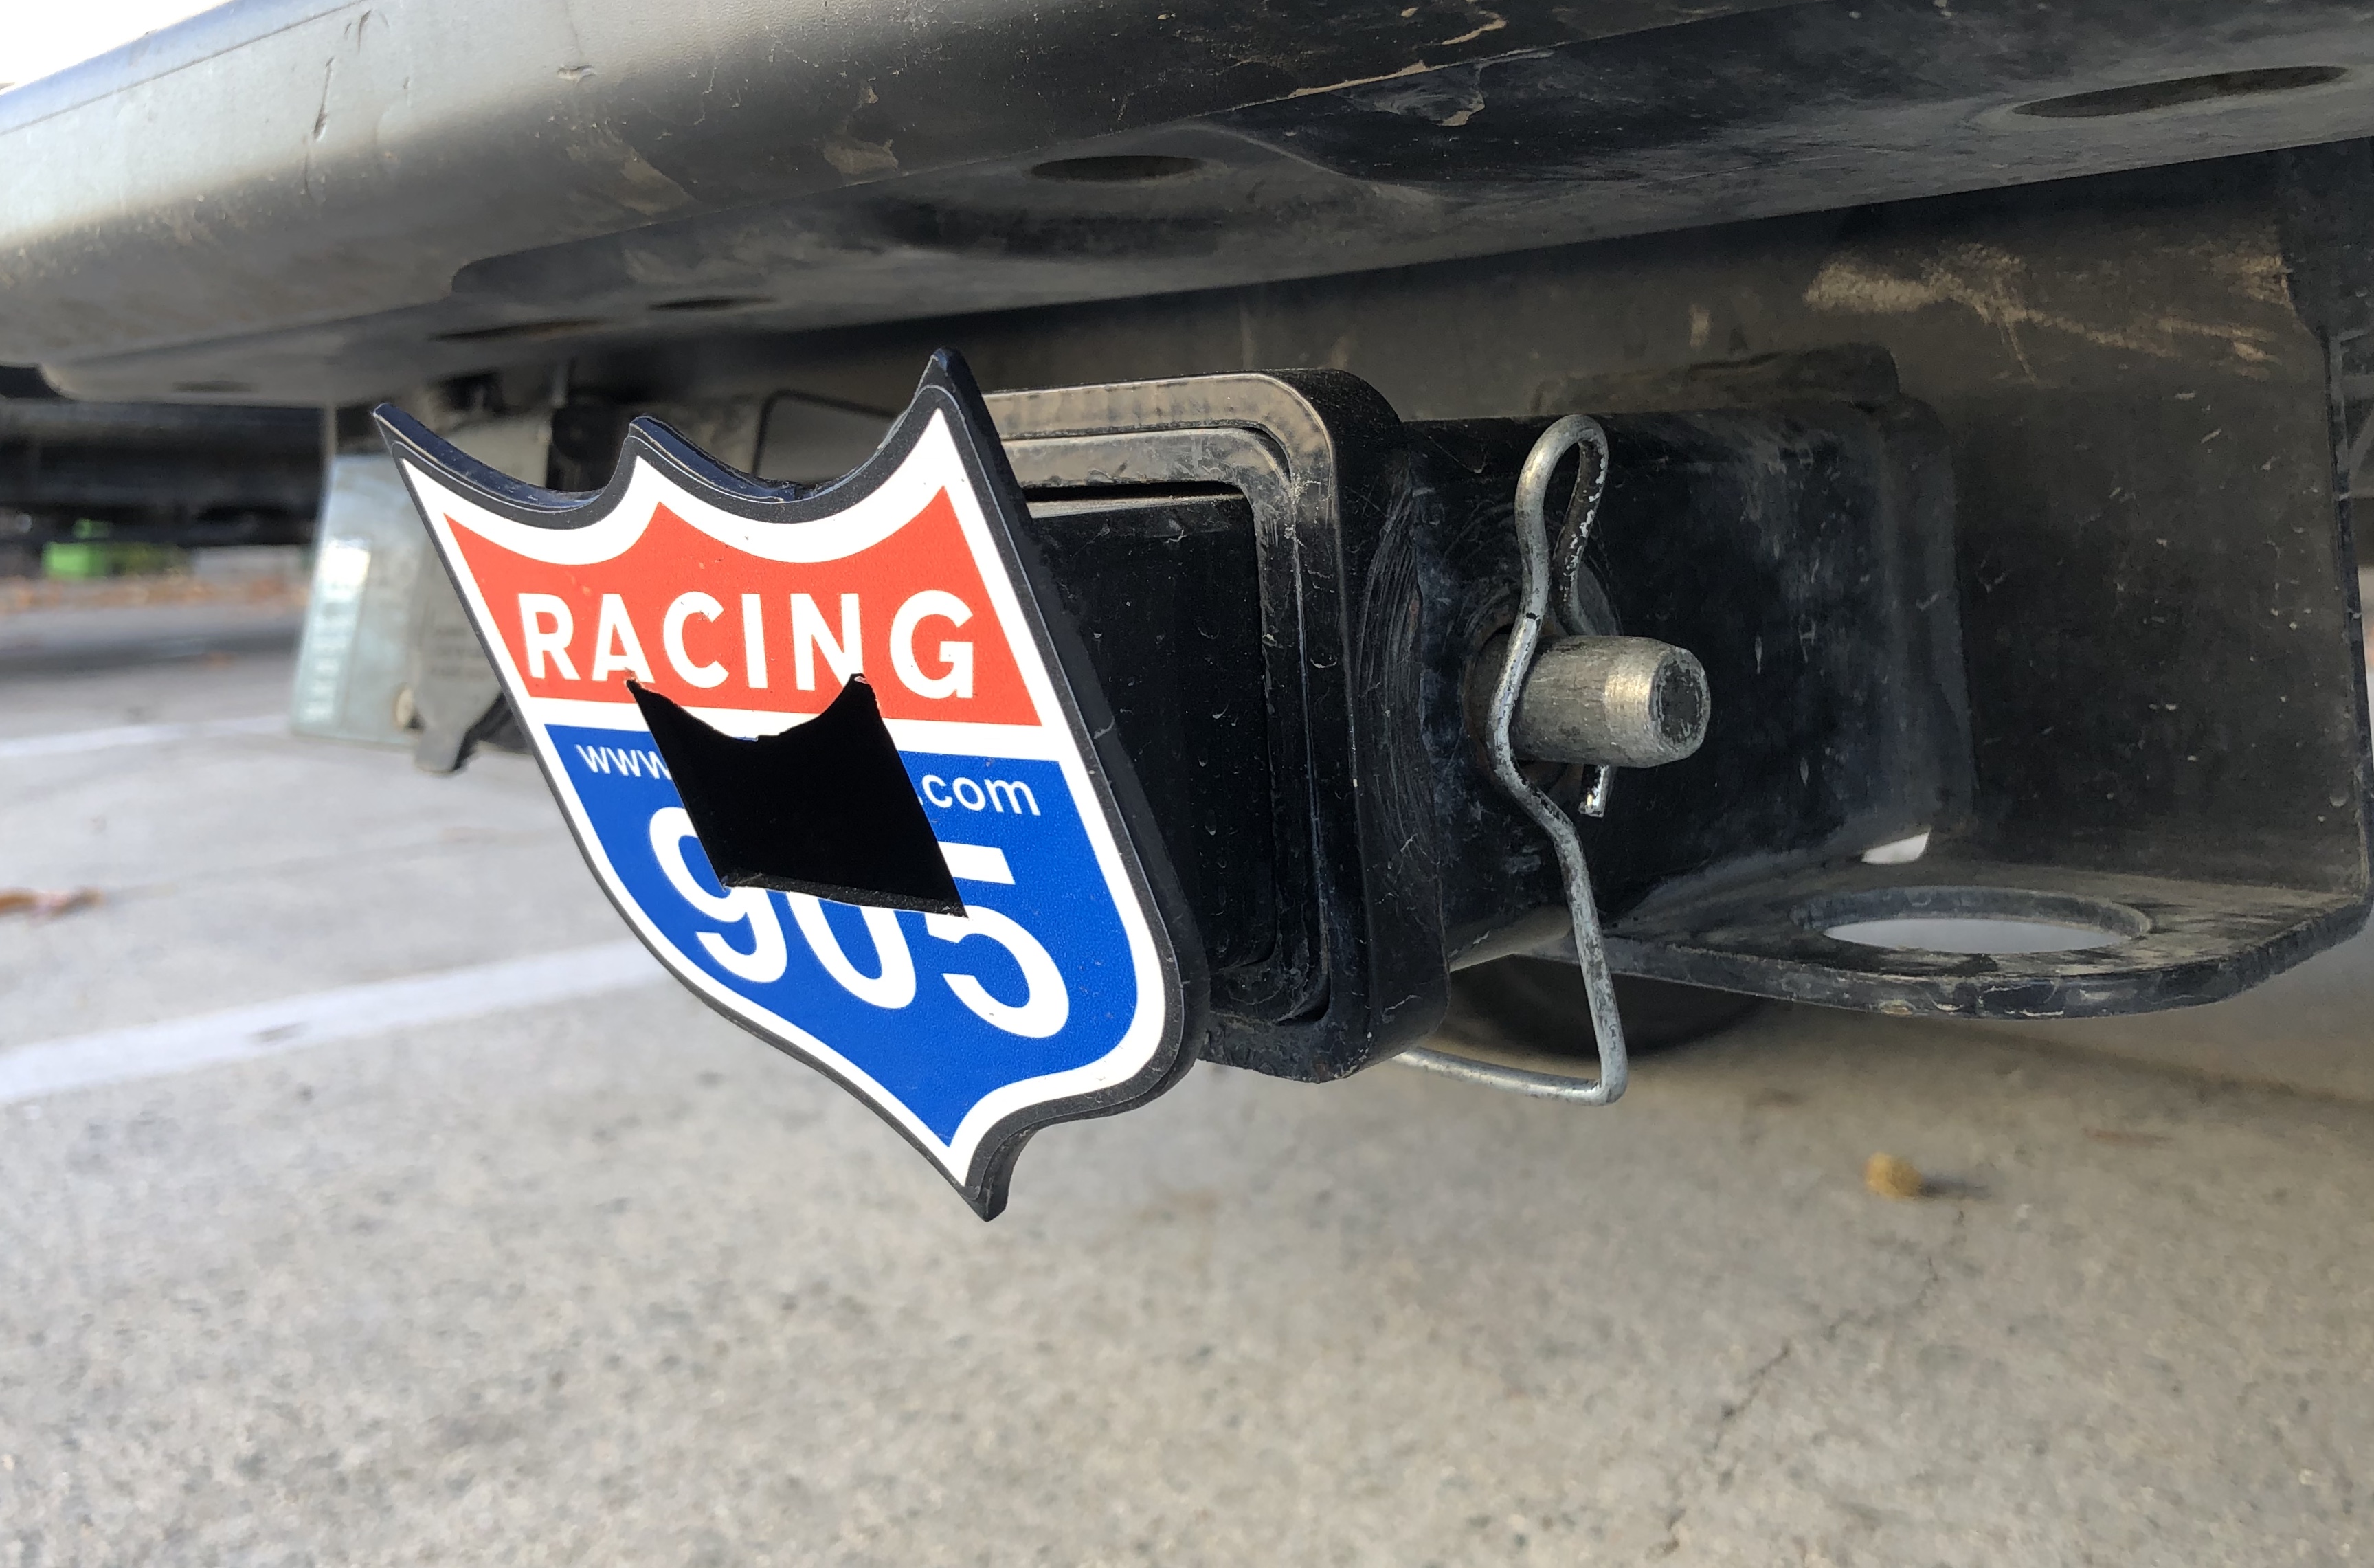 Racing 905 Trailer Tow Hitch Cover